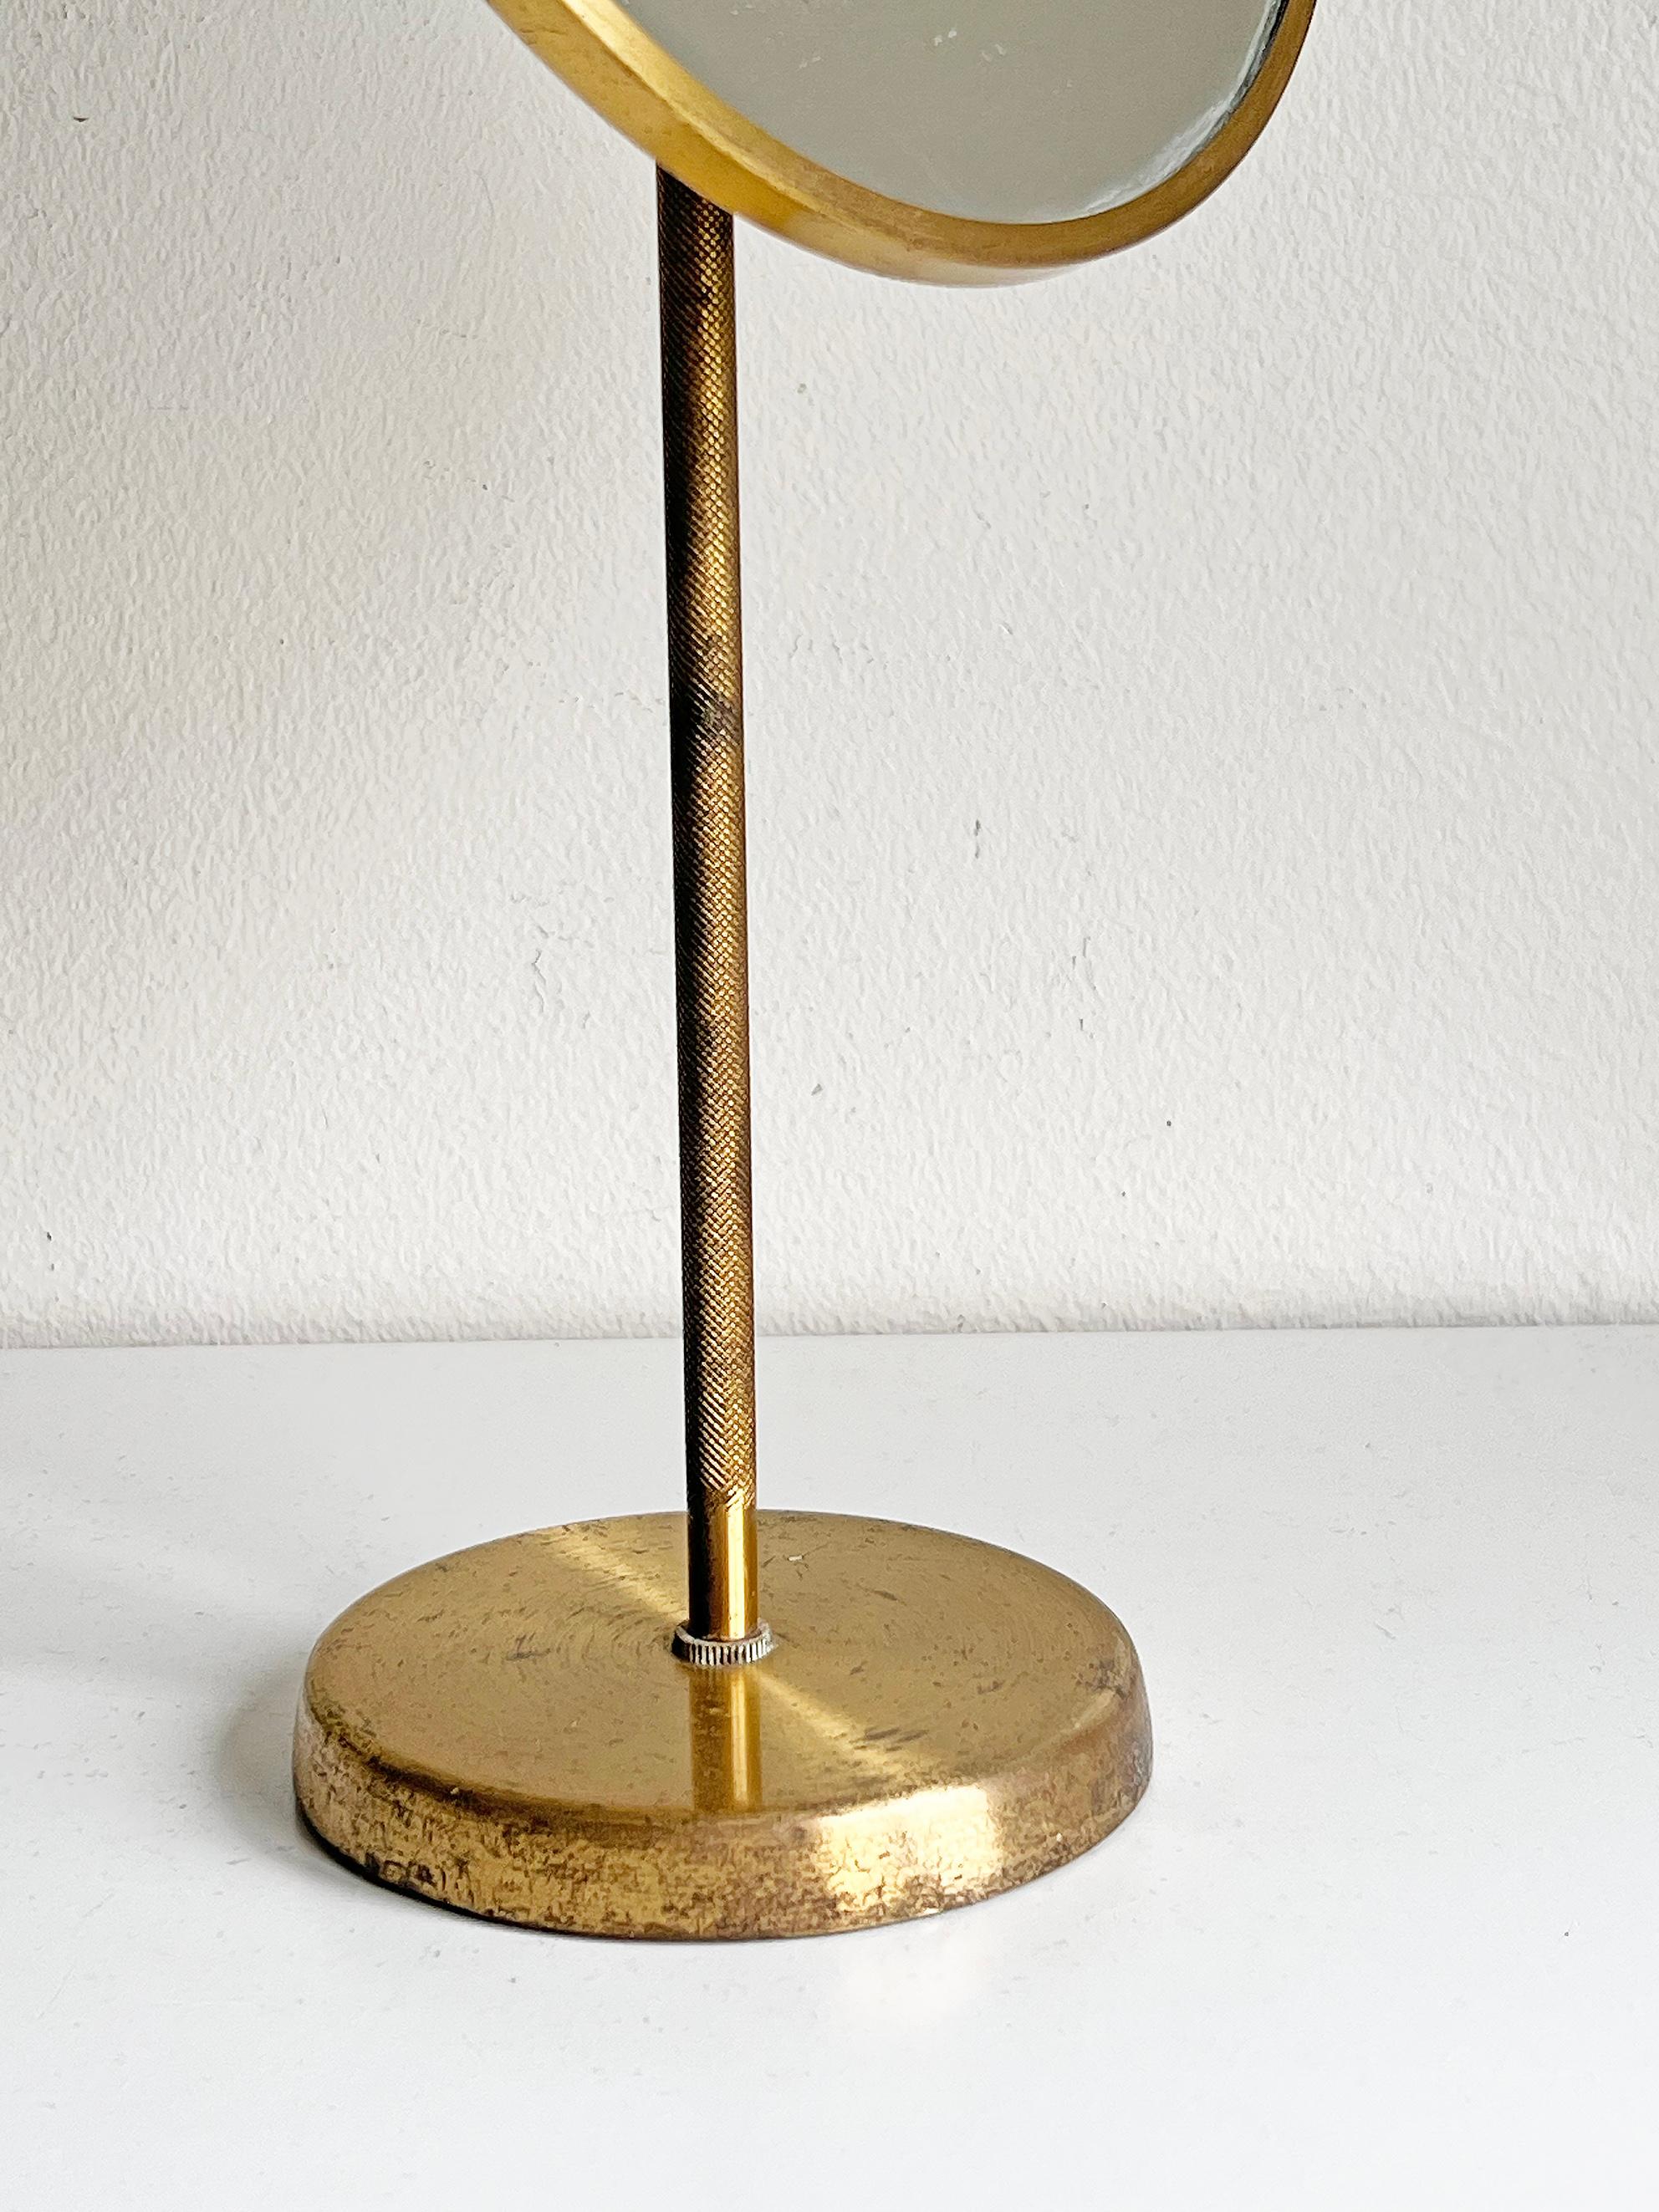 Mid-Century Modern Table Mirror in Brass, circa 1950s For Sale 3